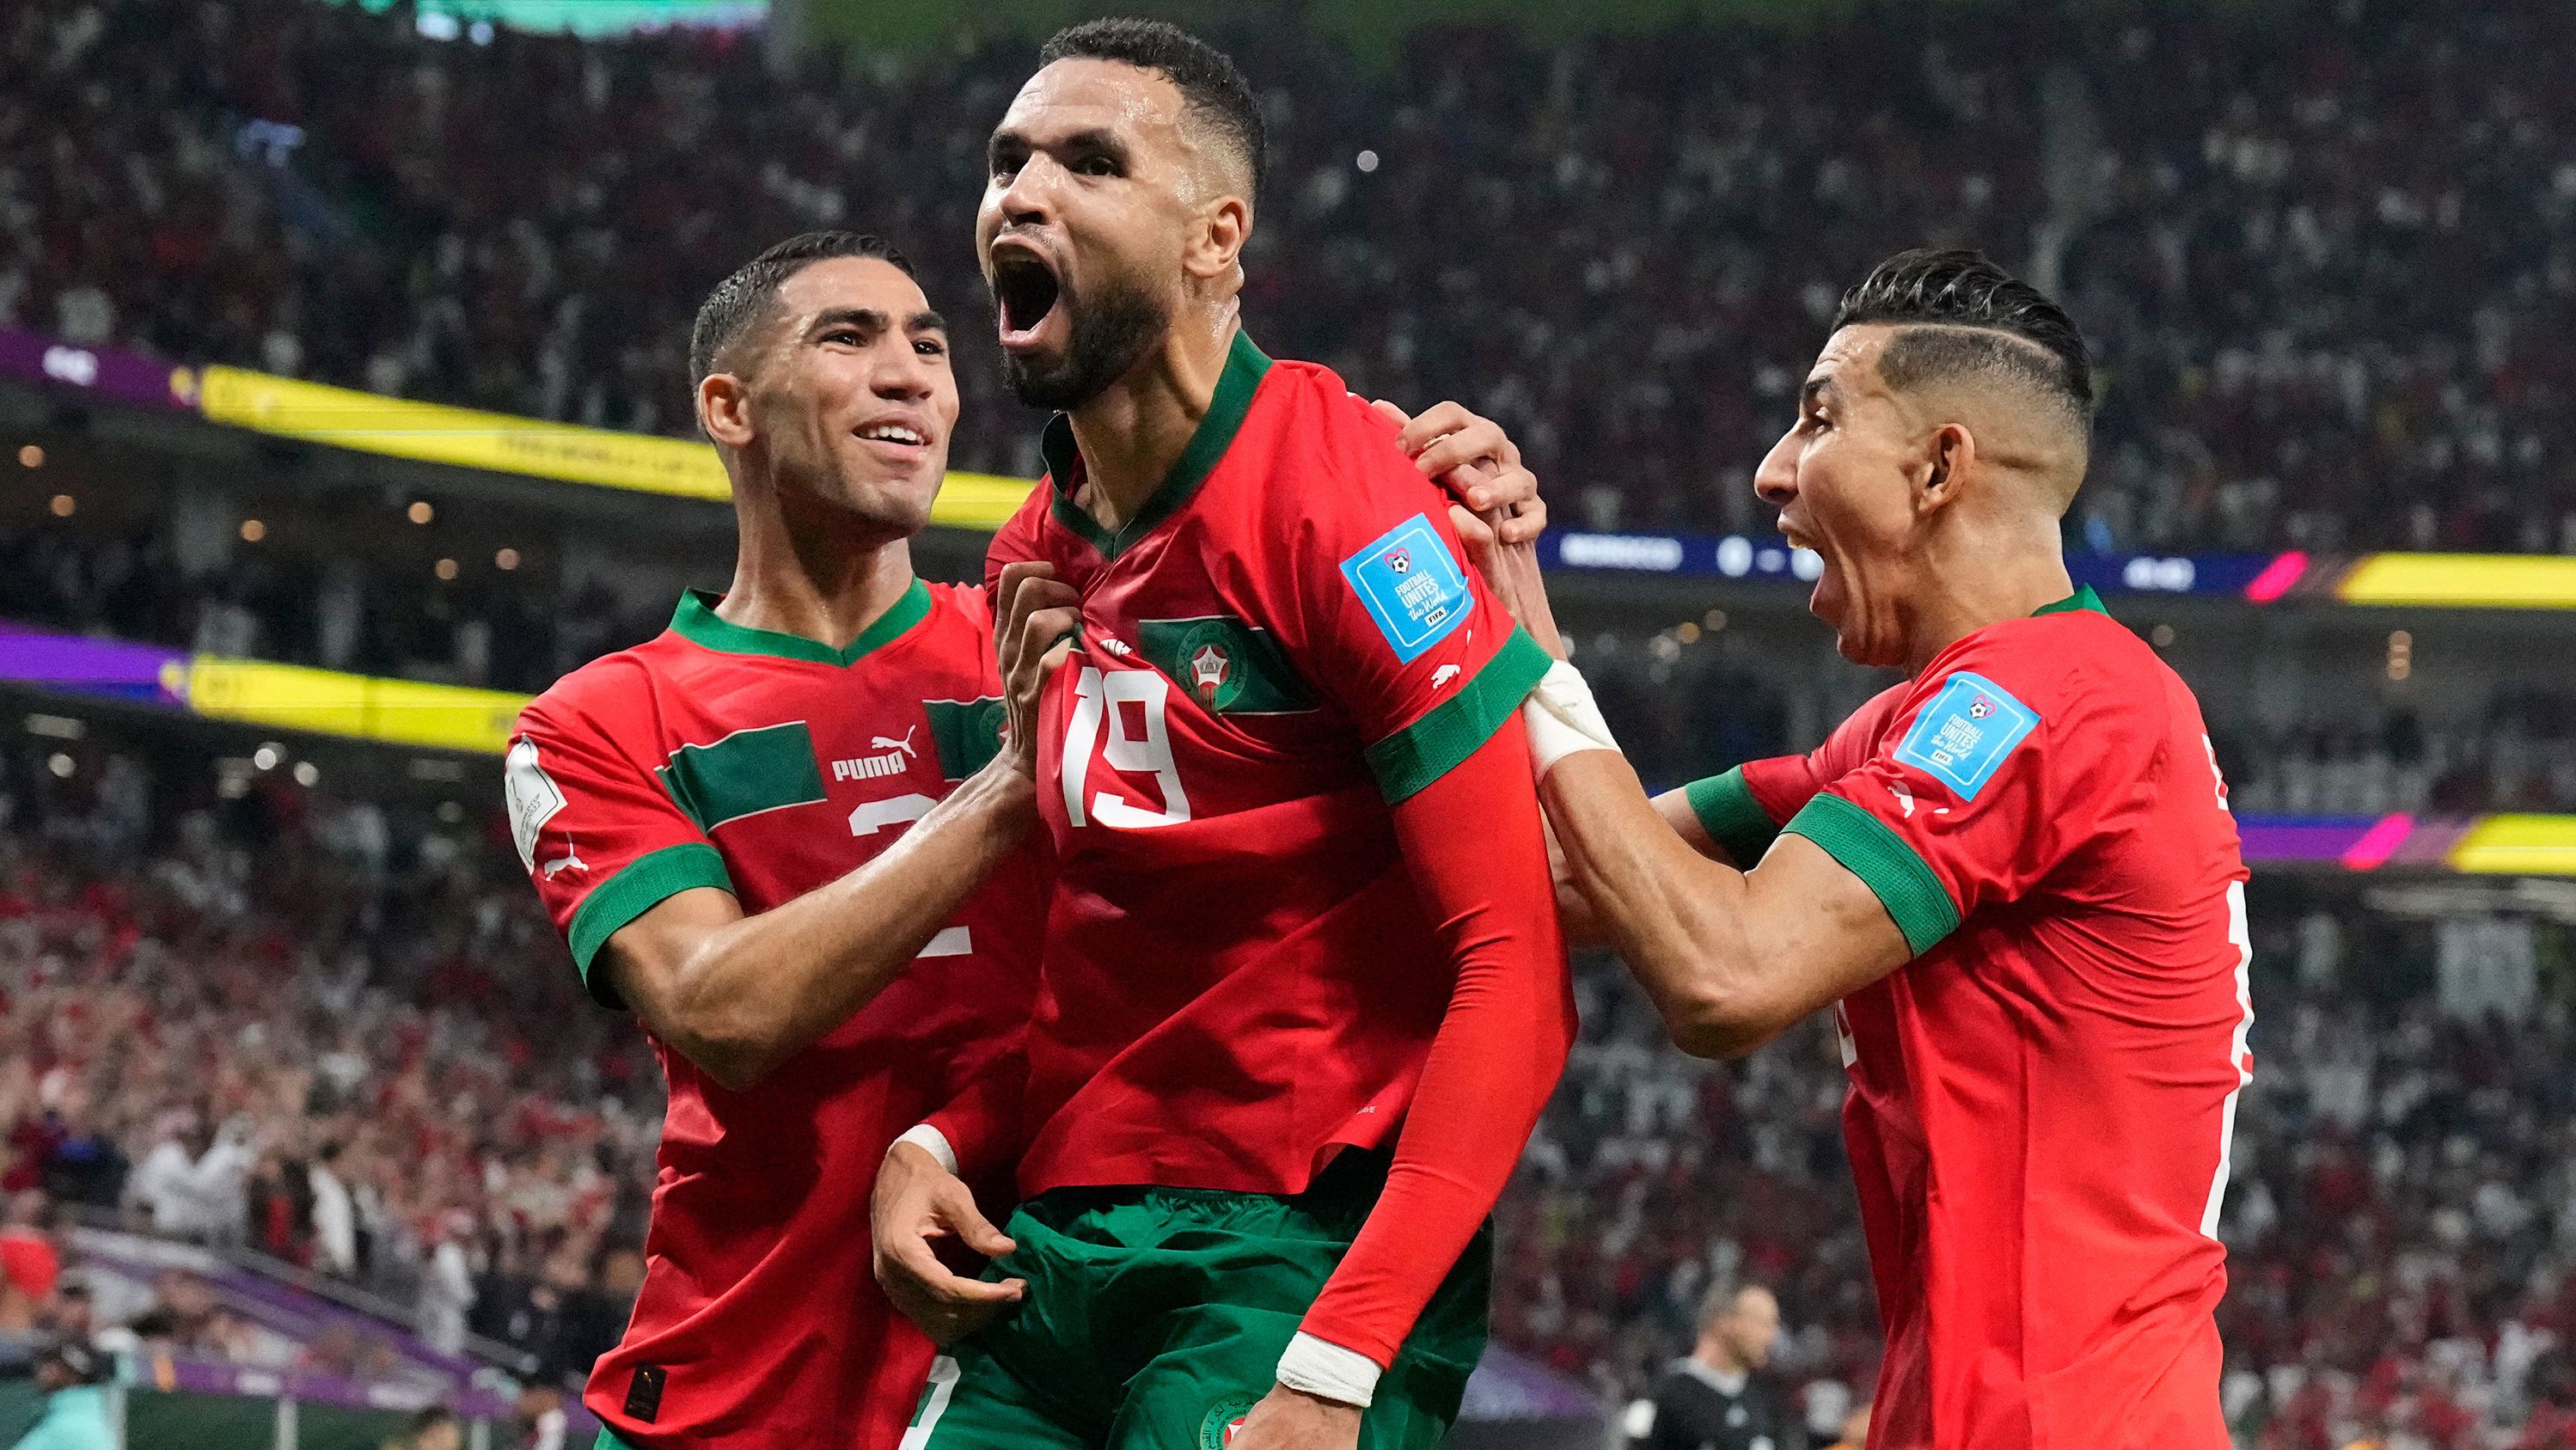 Morocco's Youssef En-Nesyri, center, celebrates after scoring the only goal in his side's World Cup quarterfinal win over Portugal, at Al Thumama Stadium in Doha, Qatar, on December 10, 2022.